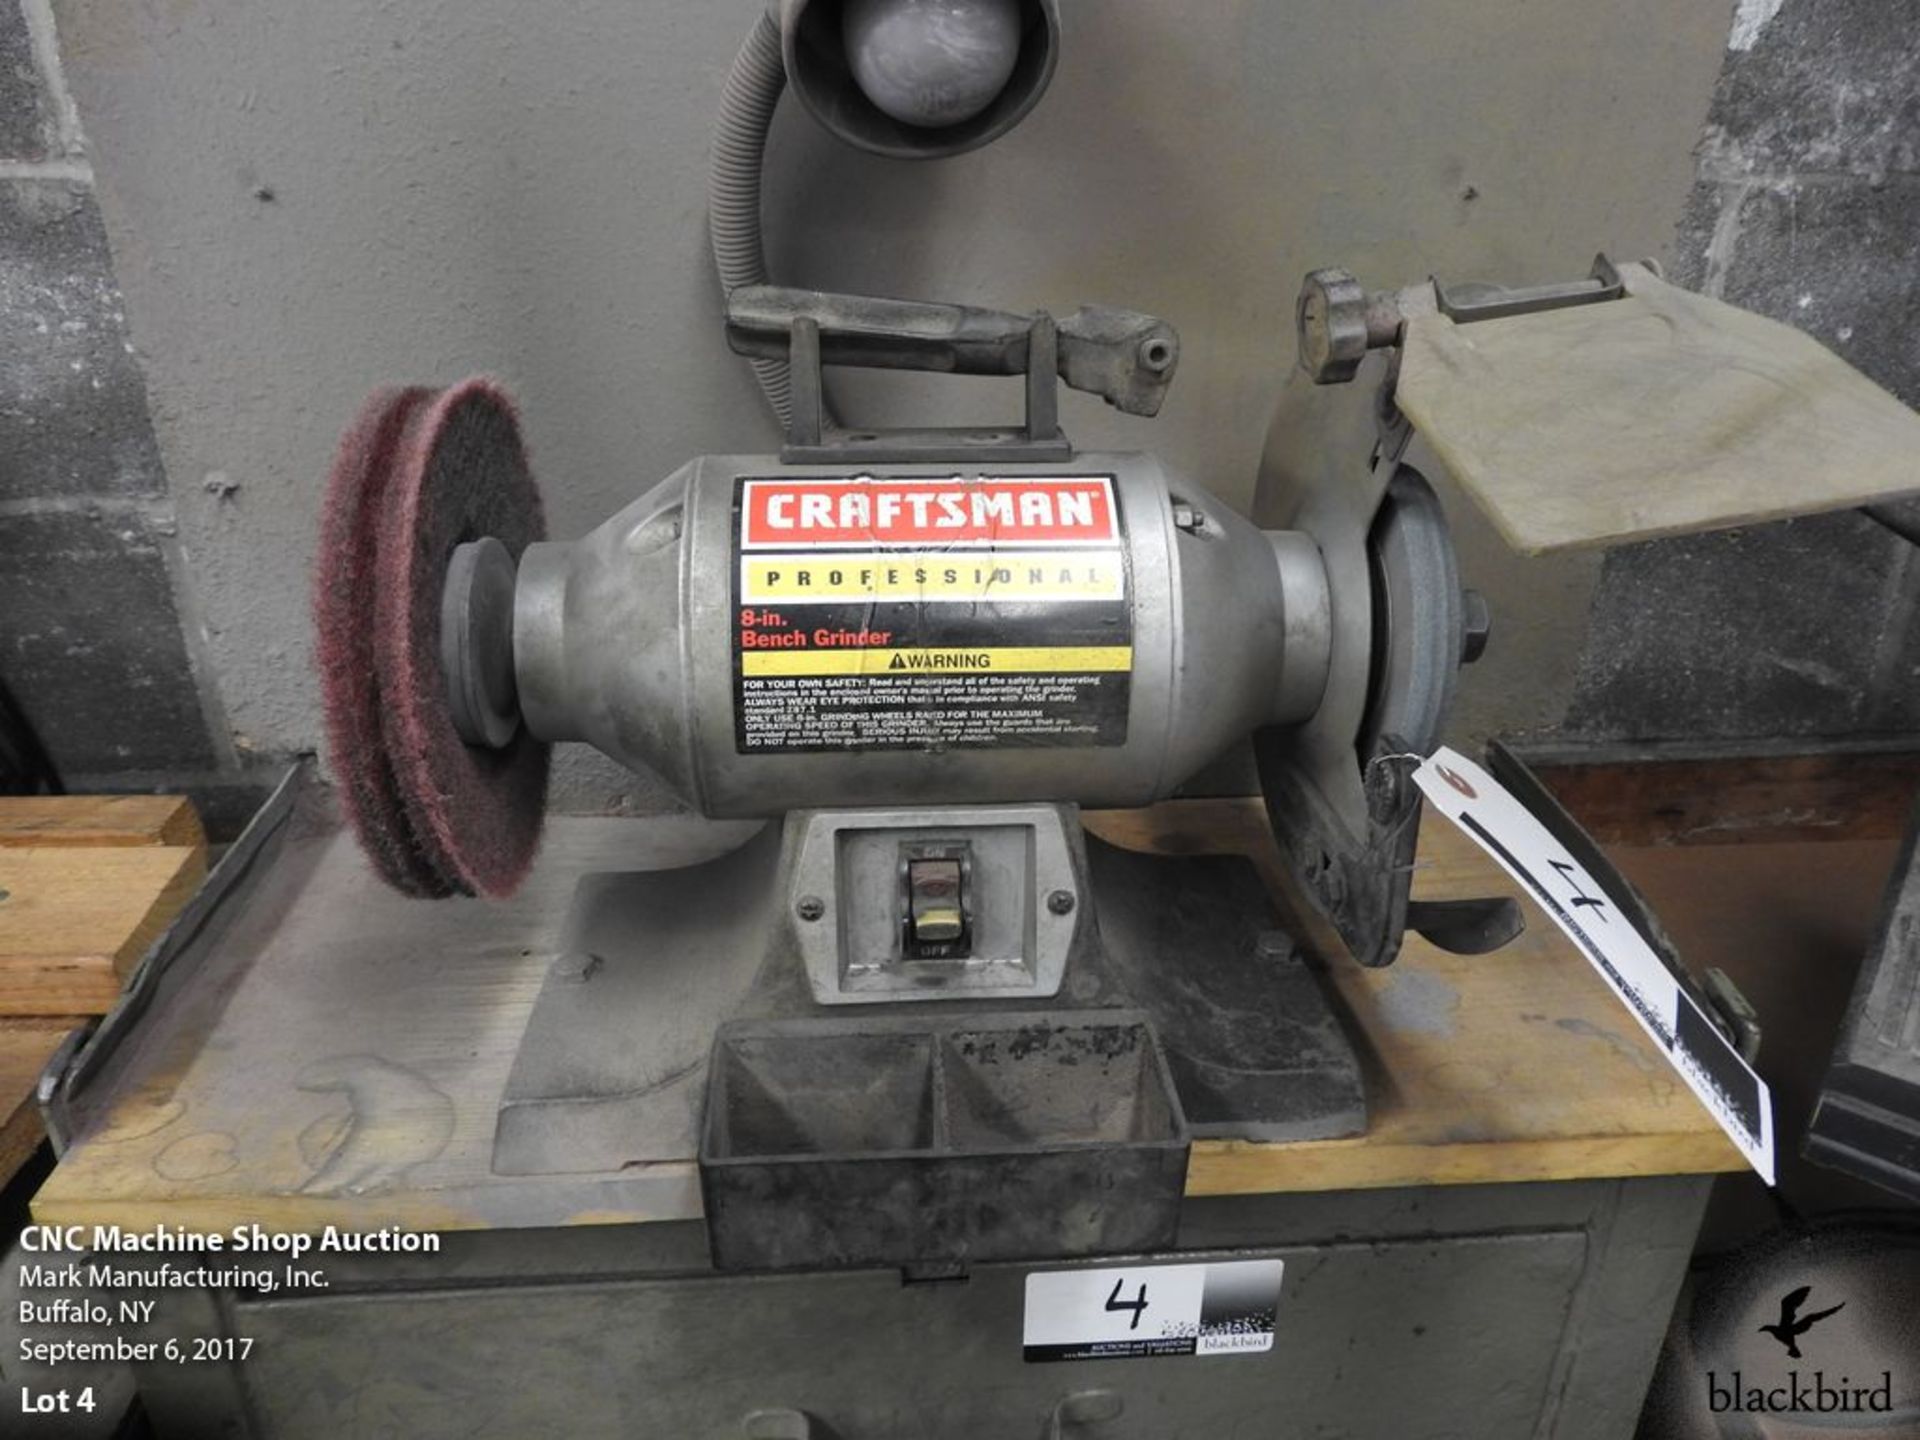 Craftsman professional 8" bench grinder with steel stand, with drawers